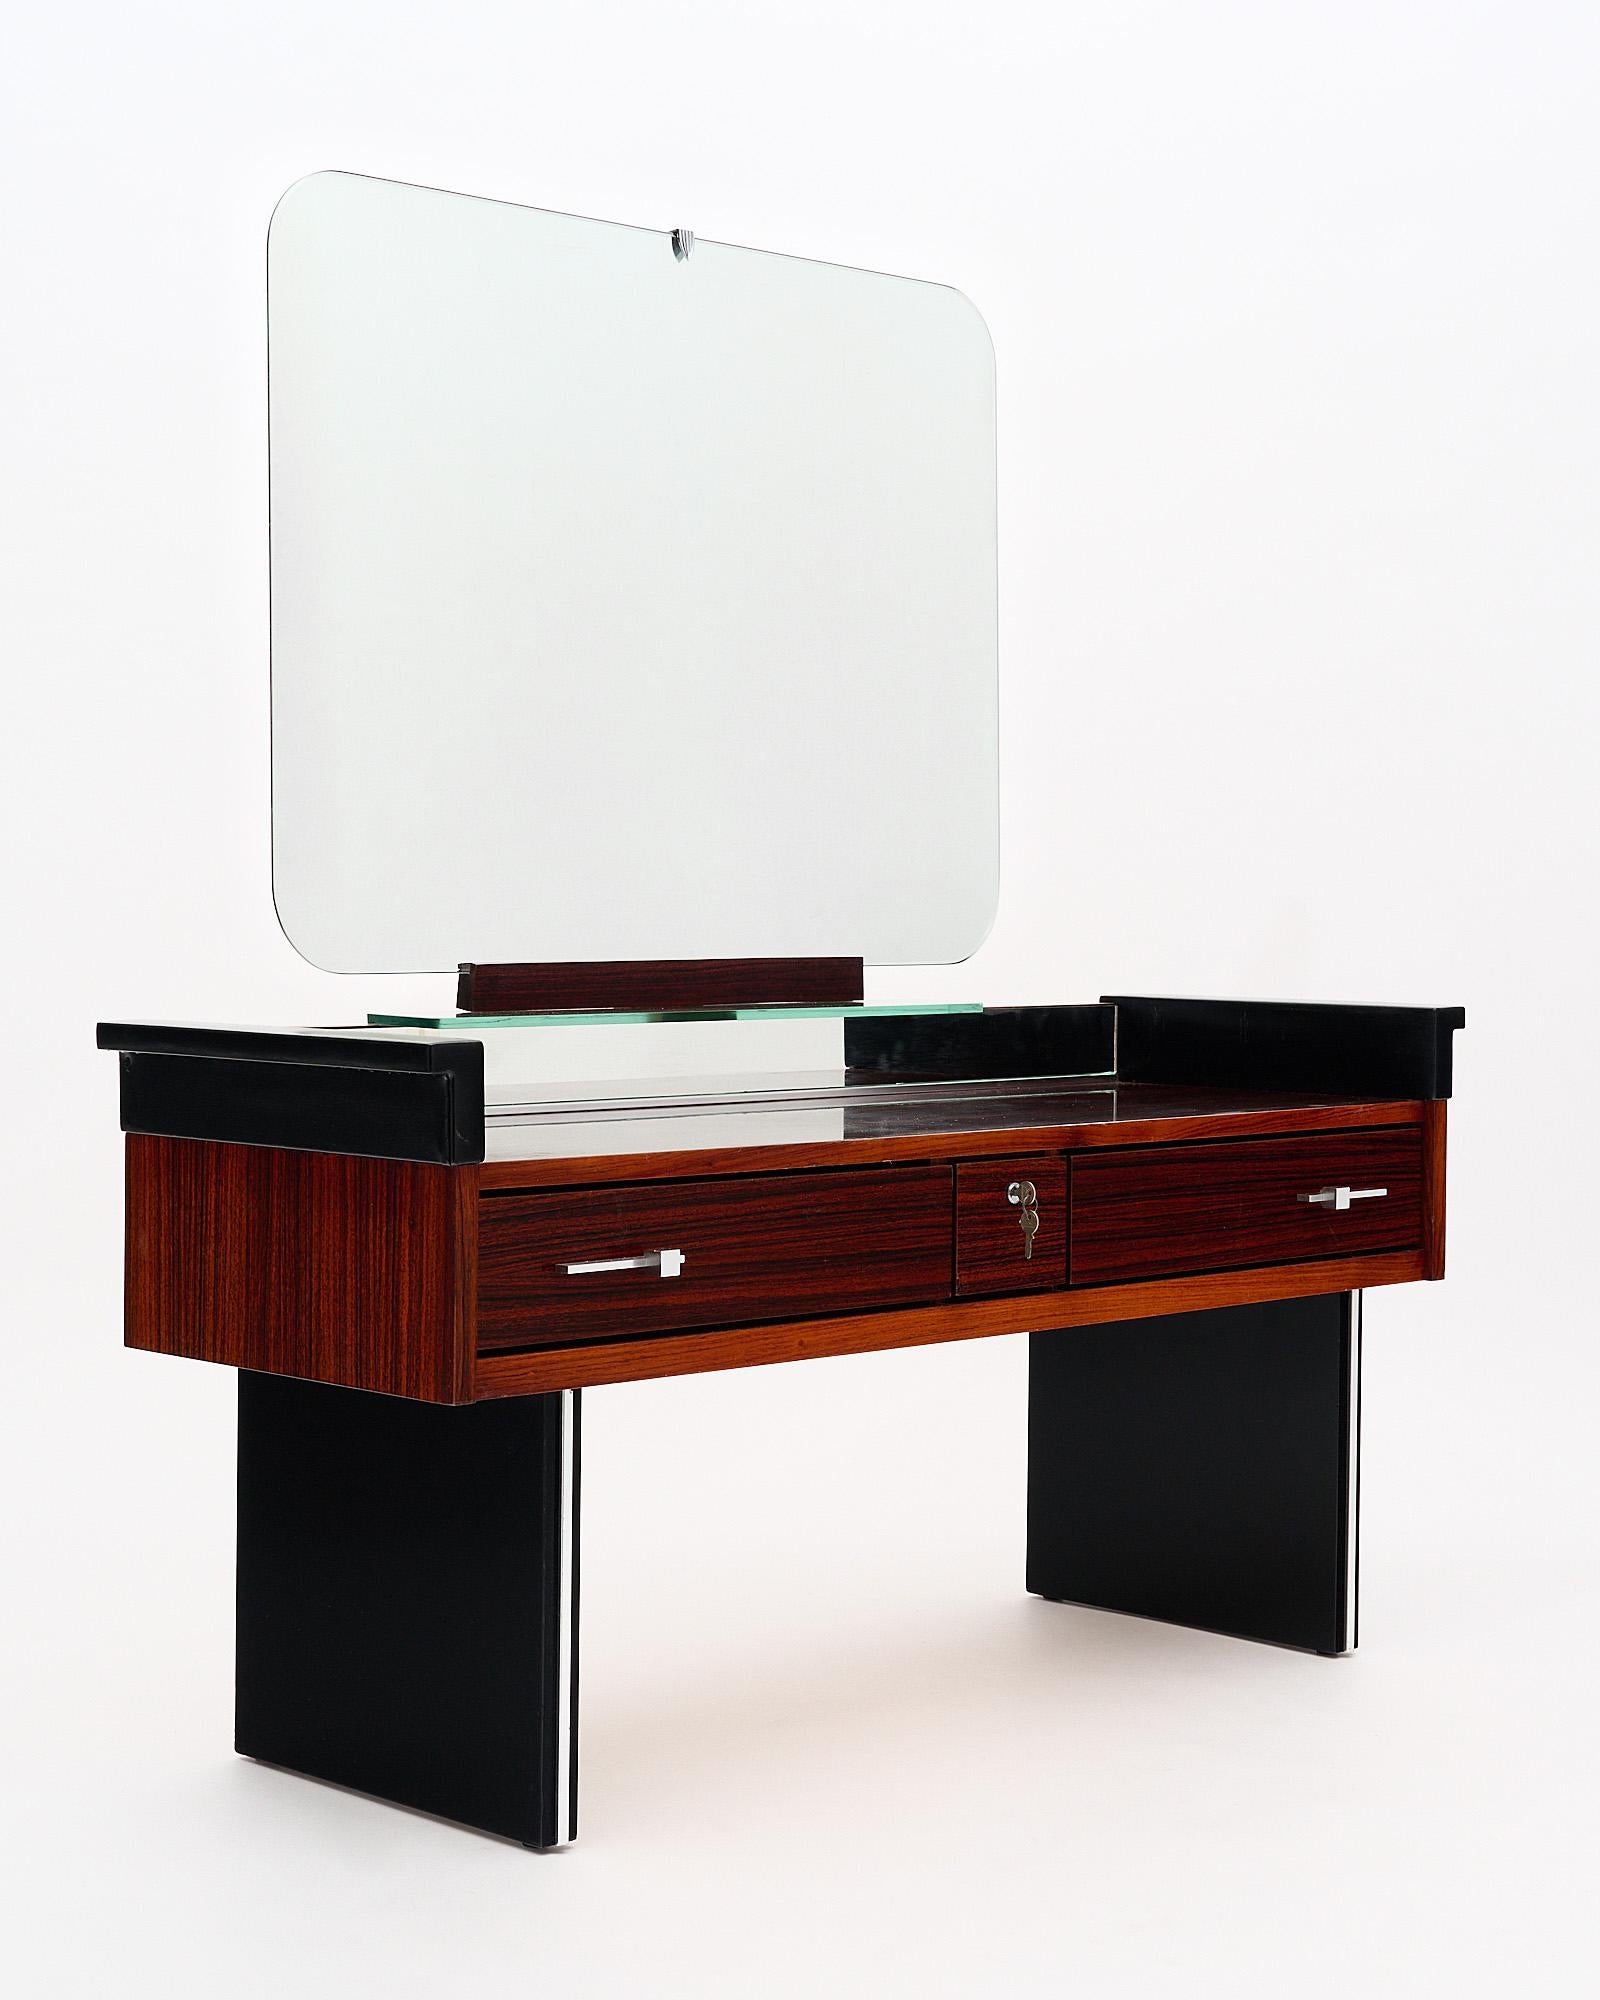 Vanity, French, made of rosewood and ebonized mahogany. The table features vinyl sides and the original mirror. The mirror itself is 27.25” in height and 32” in length. The height to the top of the vanity is 21”. There are three drawers, the central